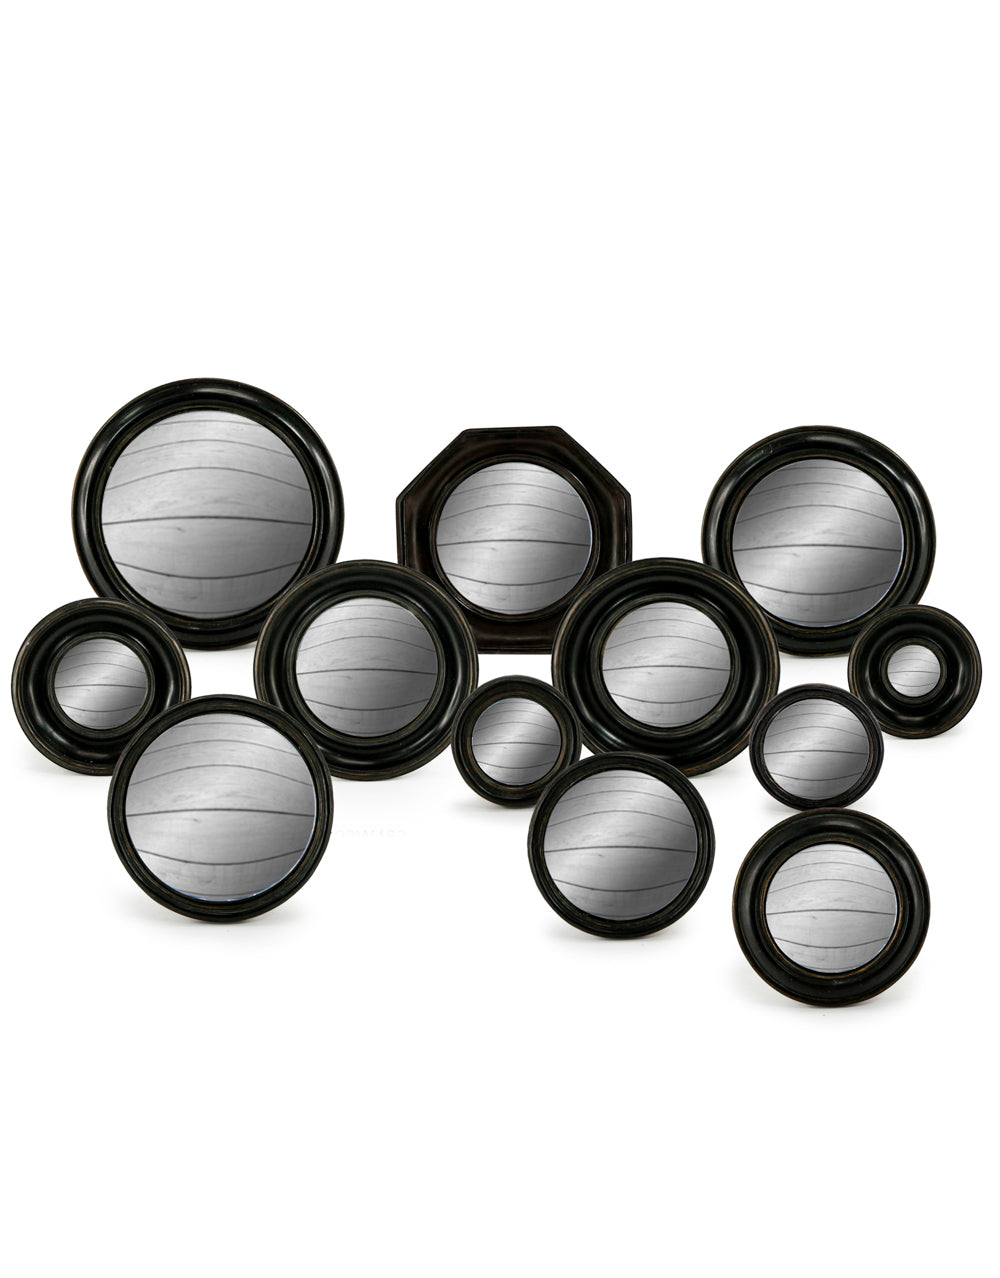 Set of 12 Assorted Black Framed Convex Mirrors